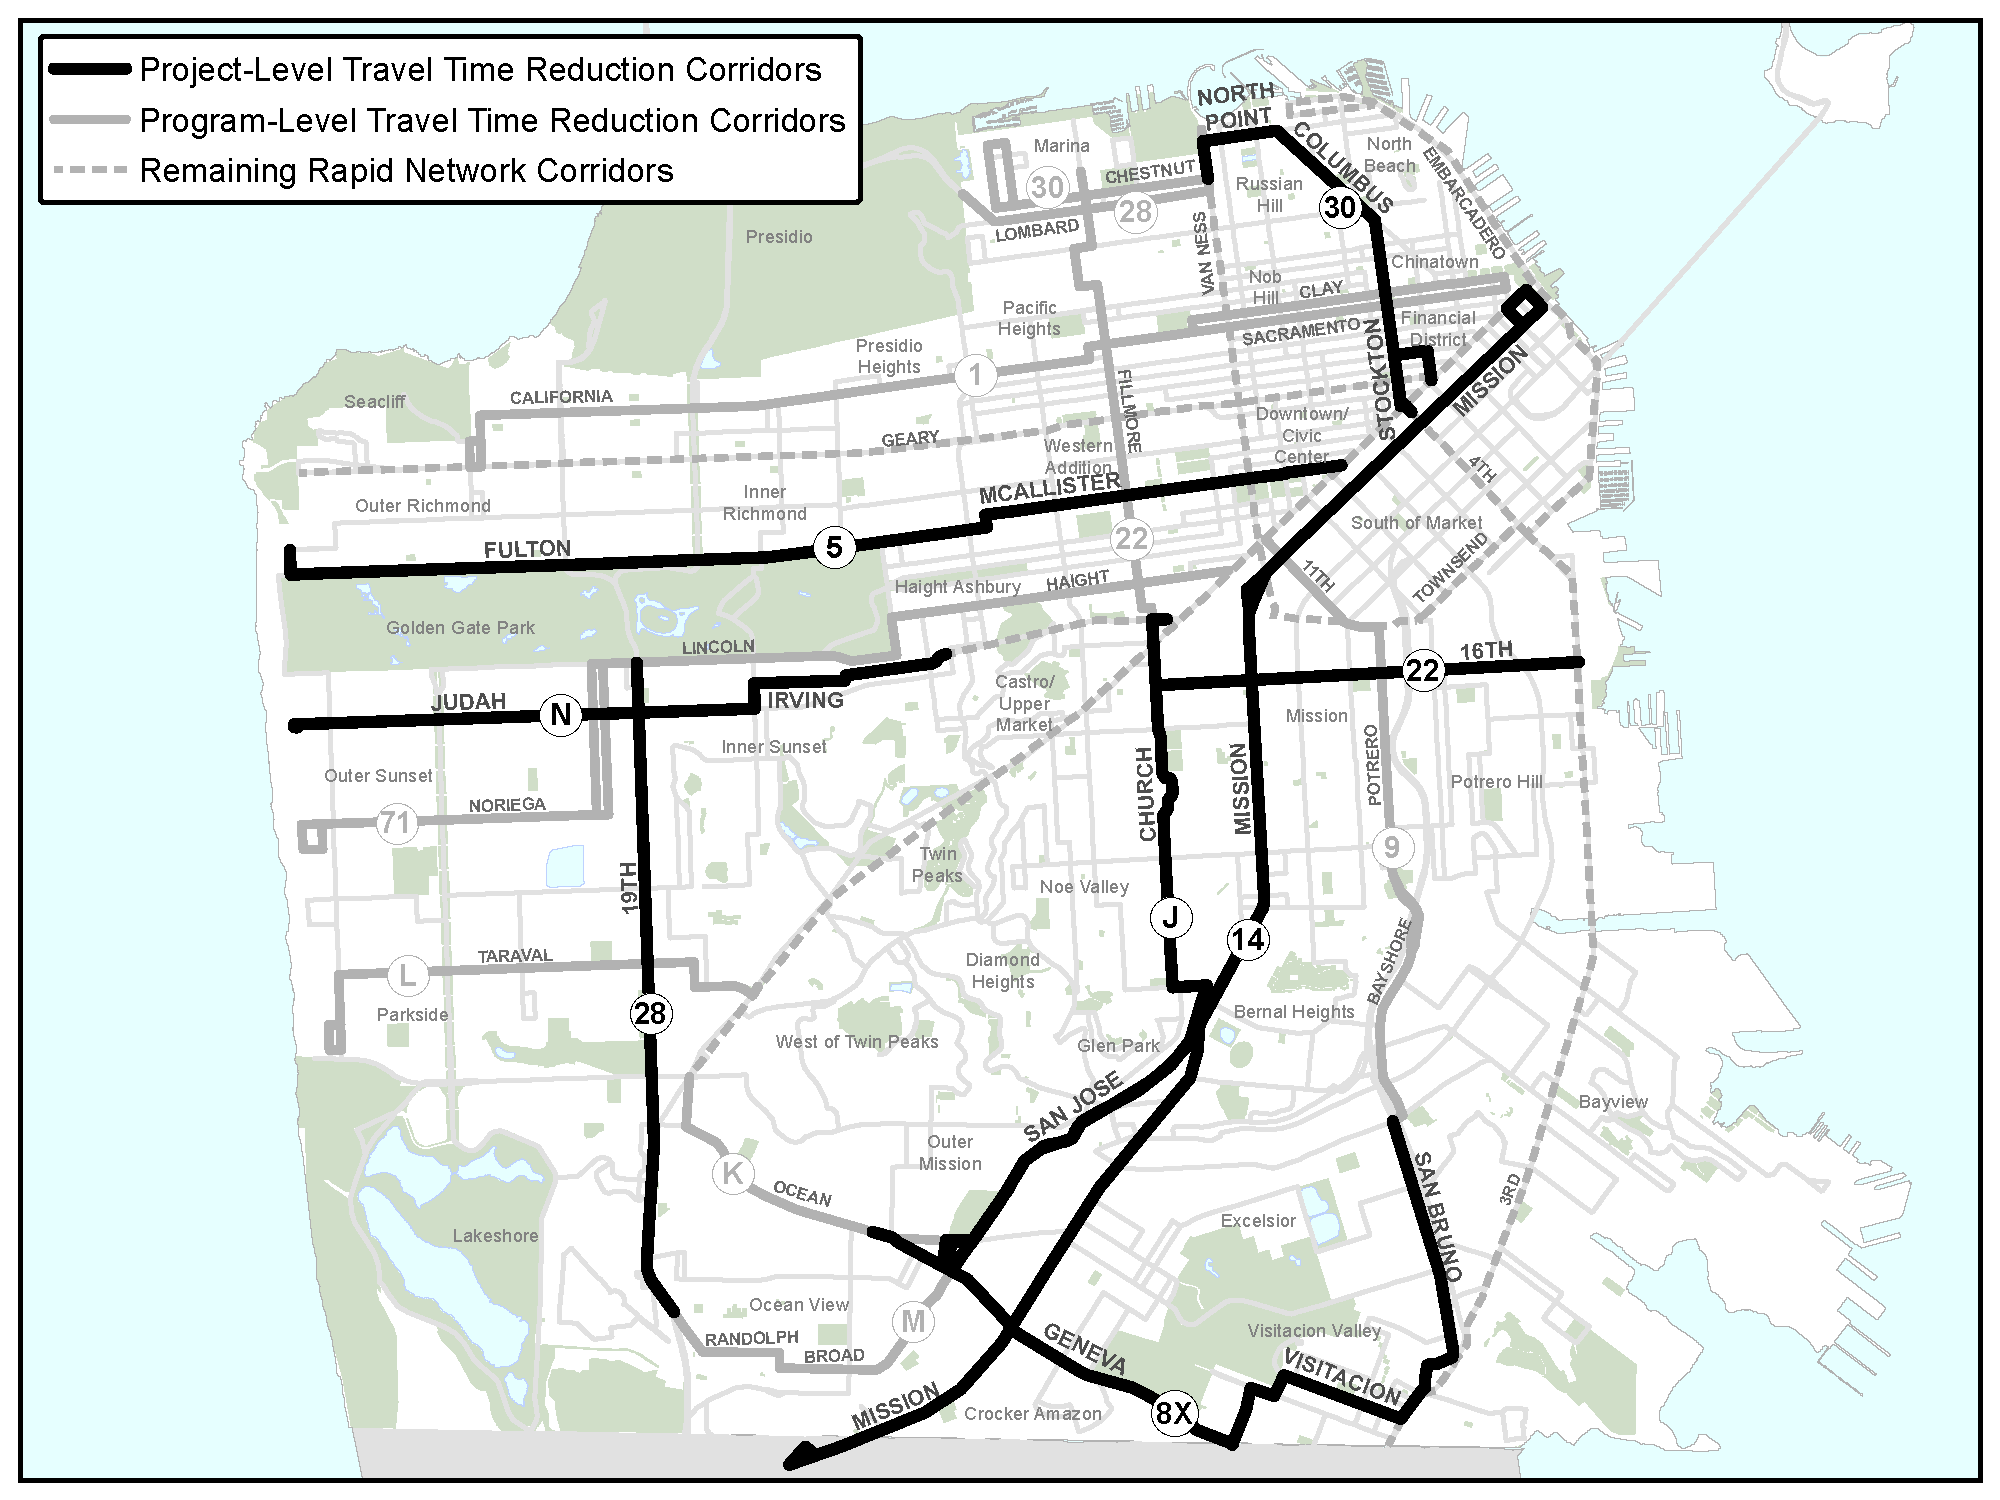 Map of San Francisco. The corridors that are part of the proposal are highlighted in red.